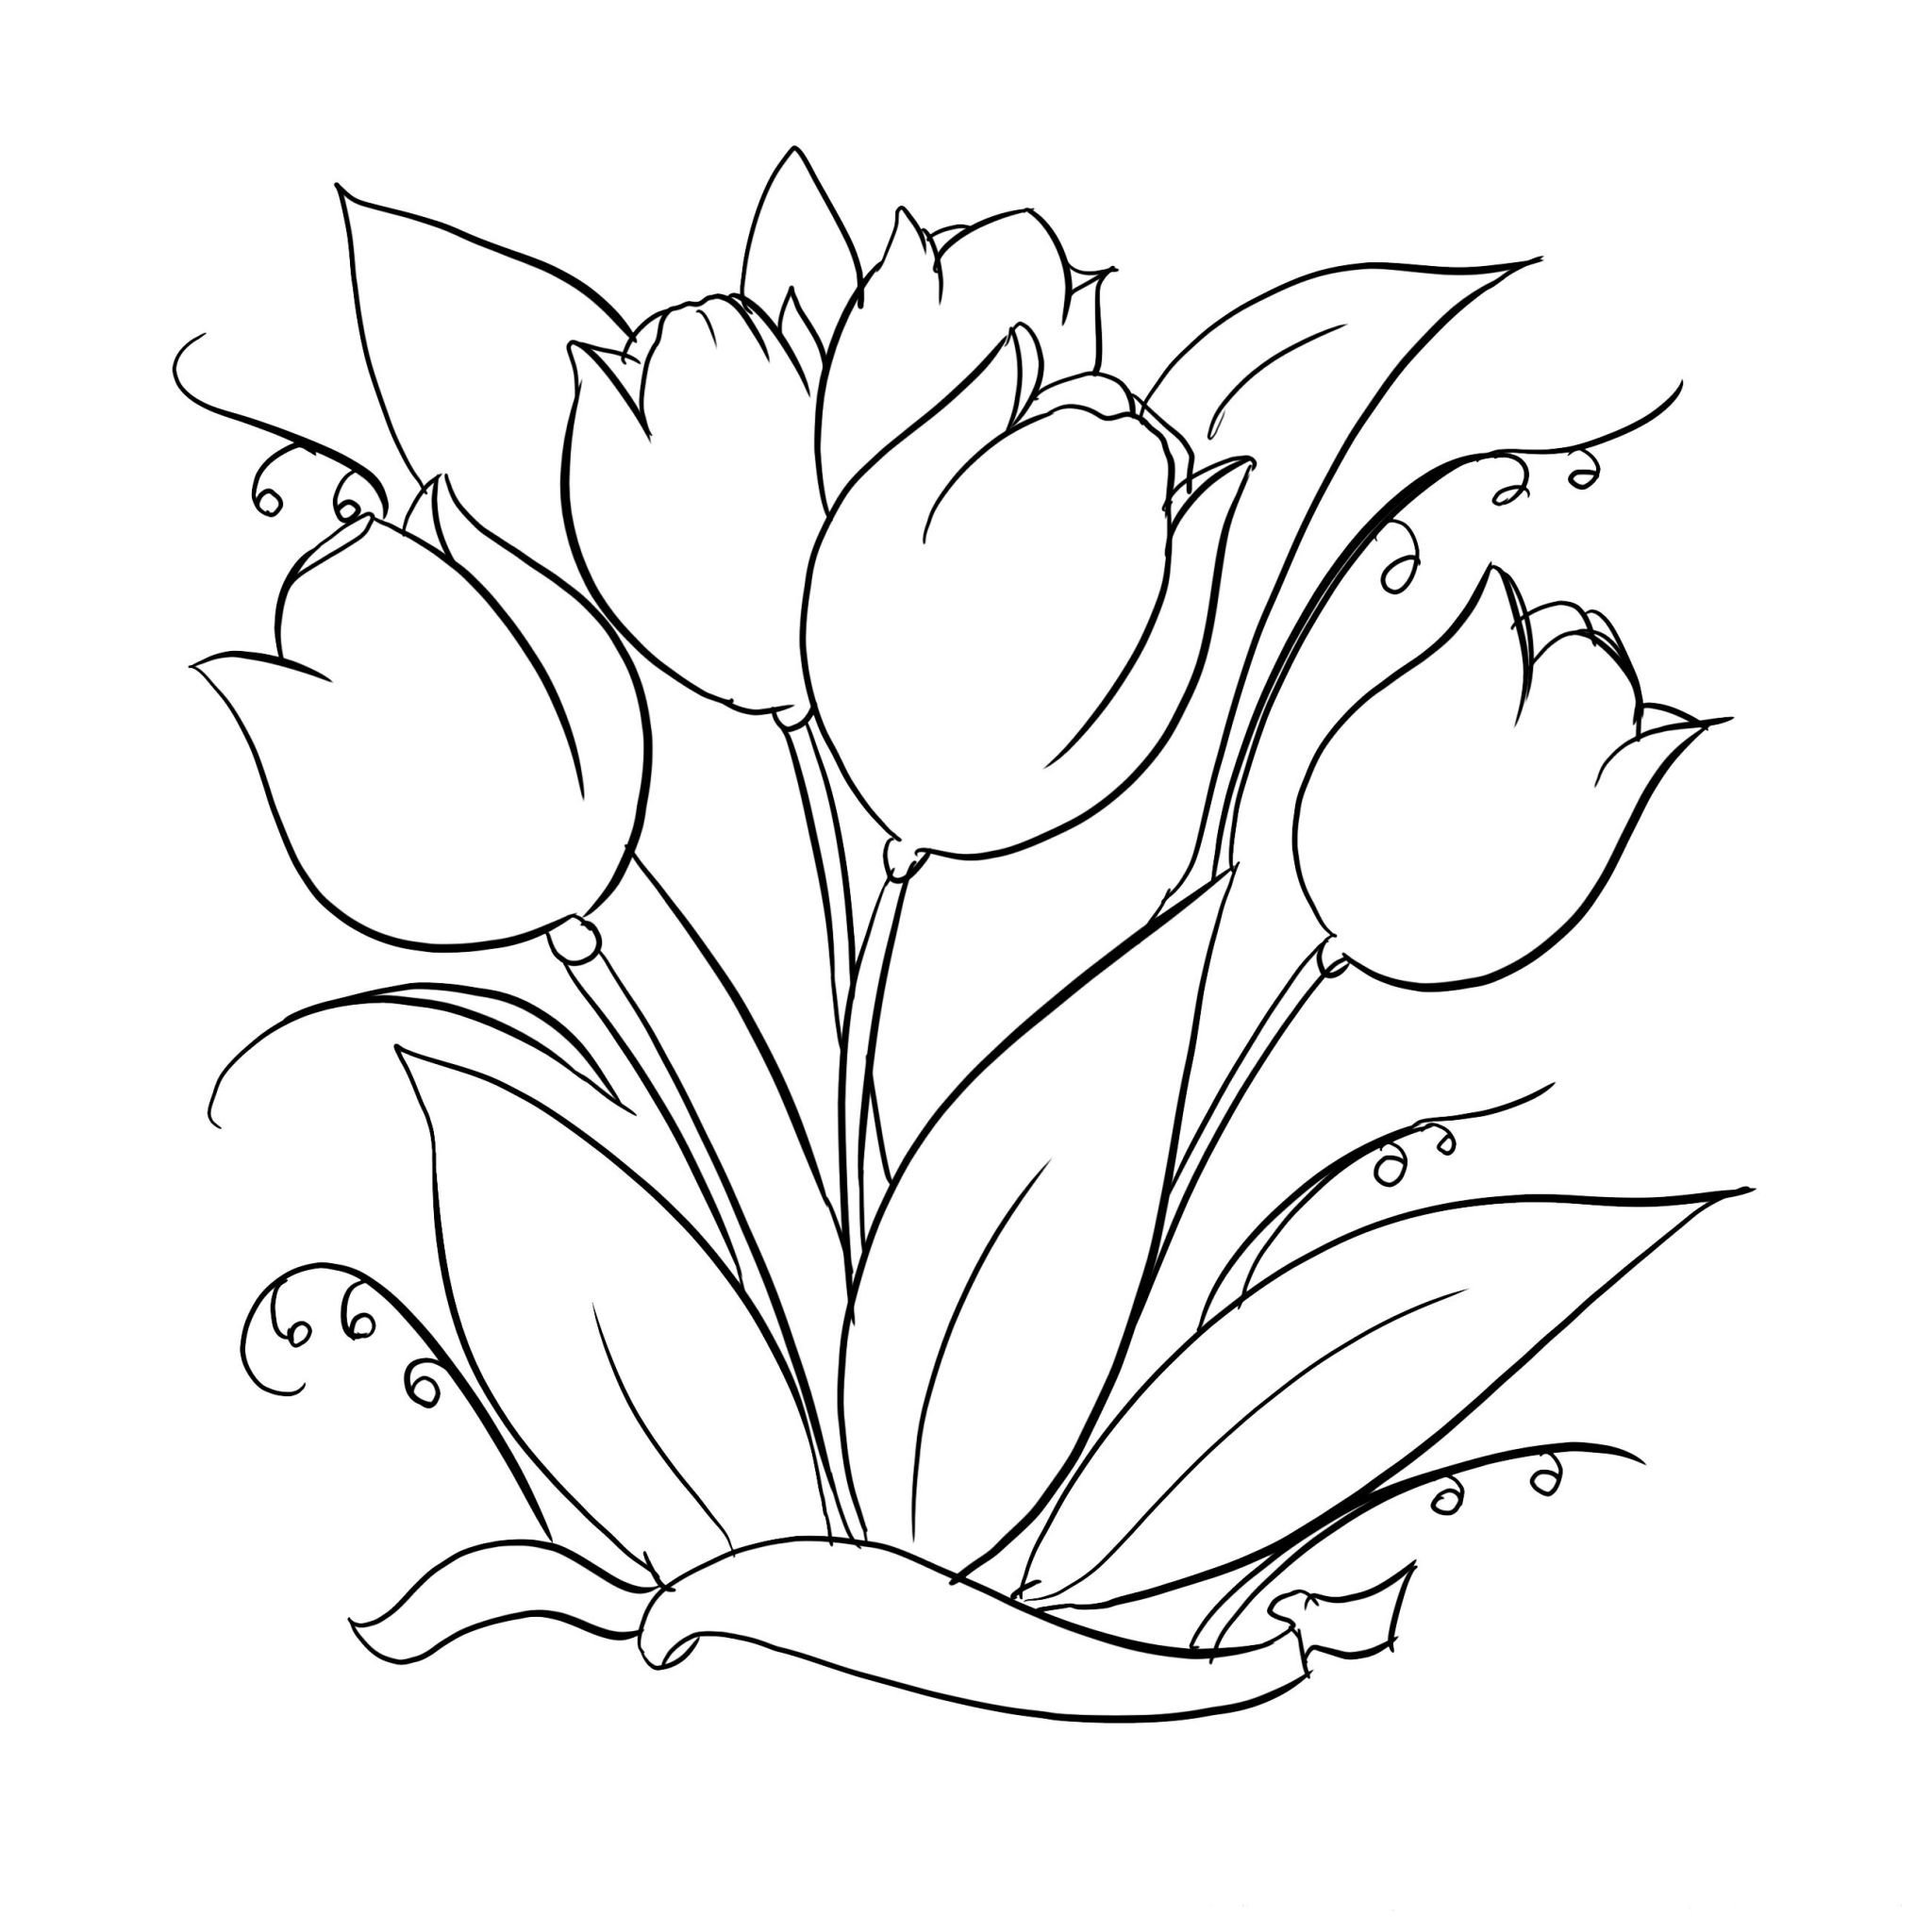 Amazing tulips coloring pages for kids